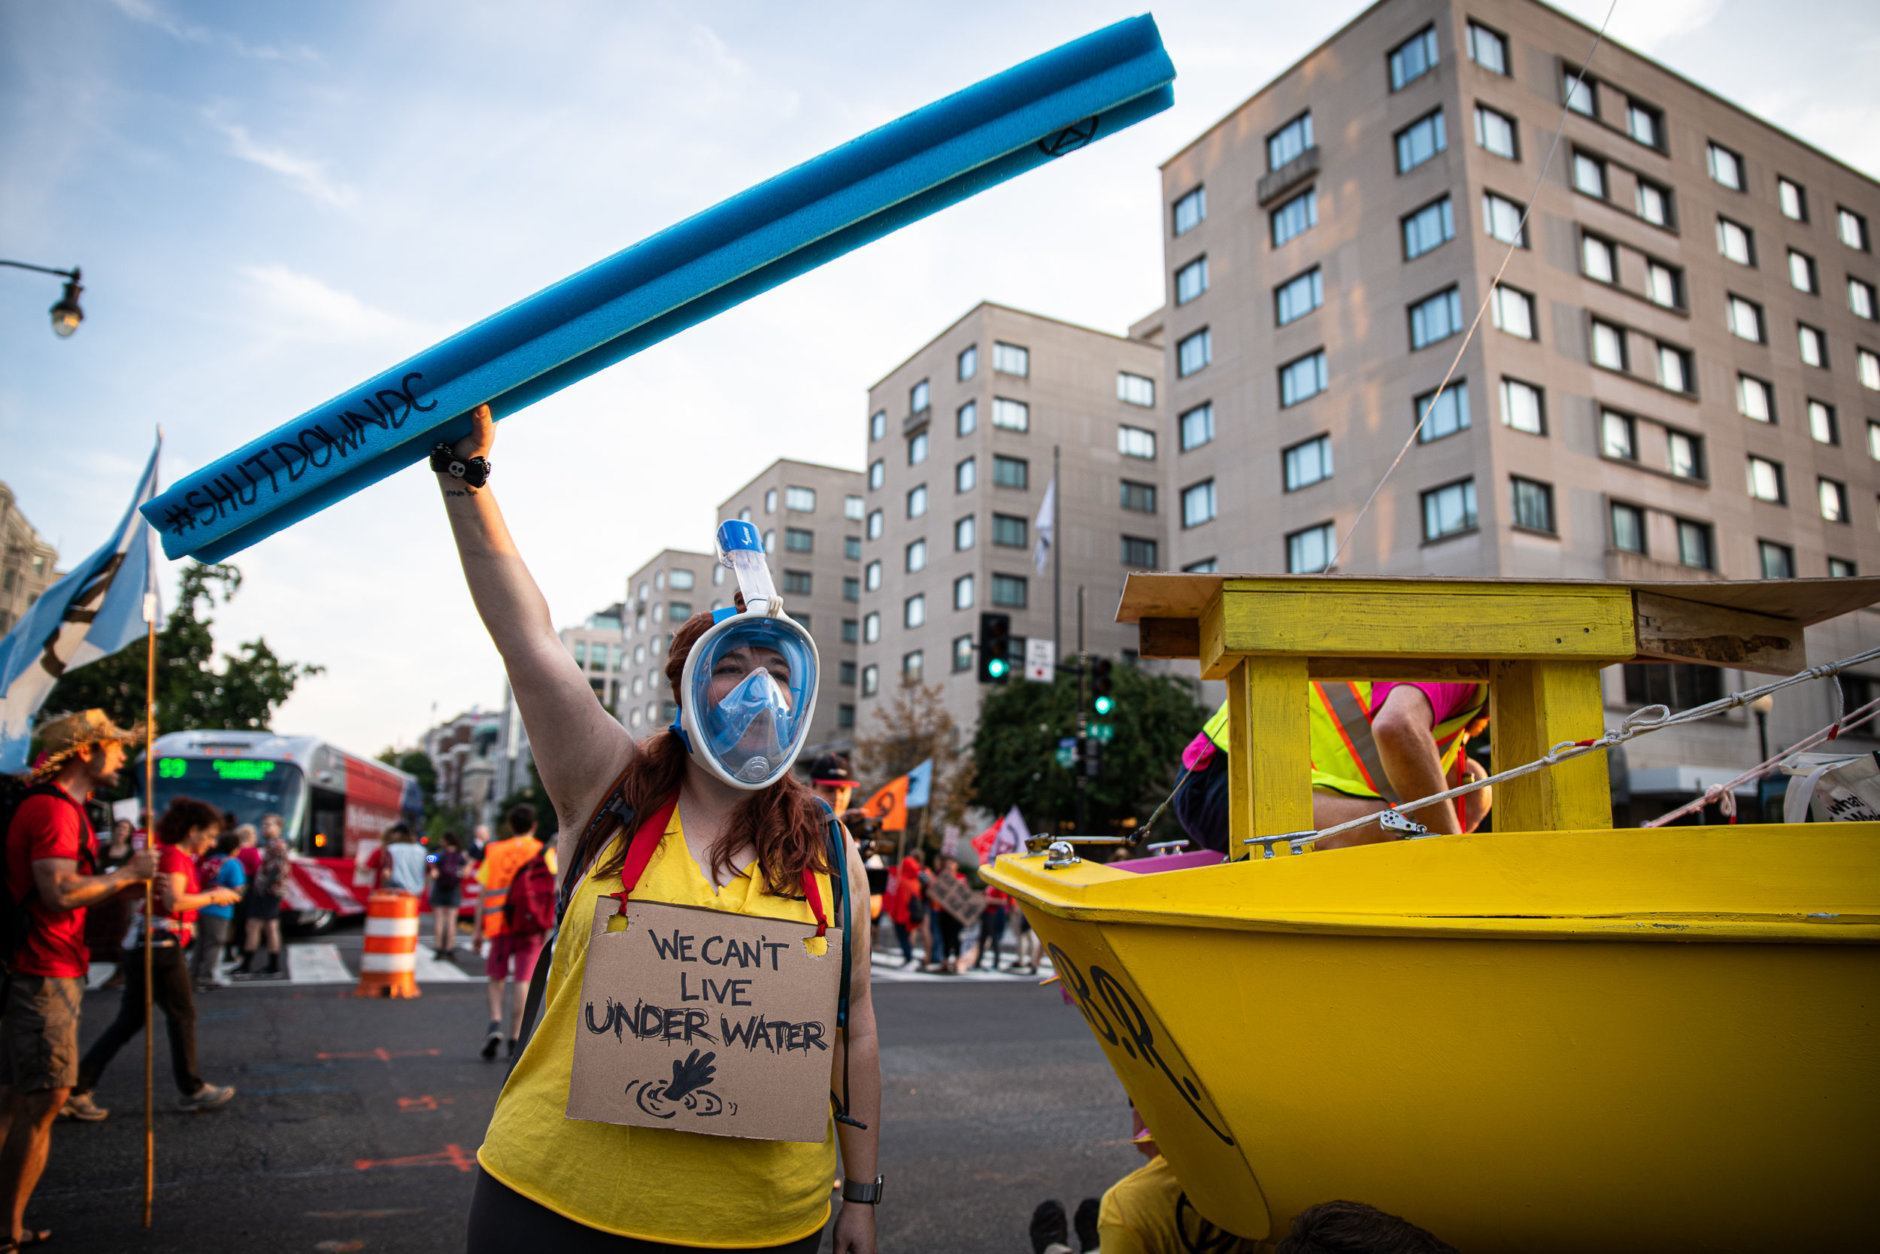 A protester with Extinction Rebellion wears a snorkel near a sailboat blocking the intersection of K and 16th streets in Washington, D.C. on Sept. 23, 2019. Environmental activists pressured lawmakers to declare a climate change emergency by paralyzing morning traffic in the nation's capital. (WTOP/Alejandro Alvarez)